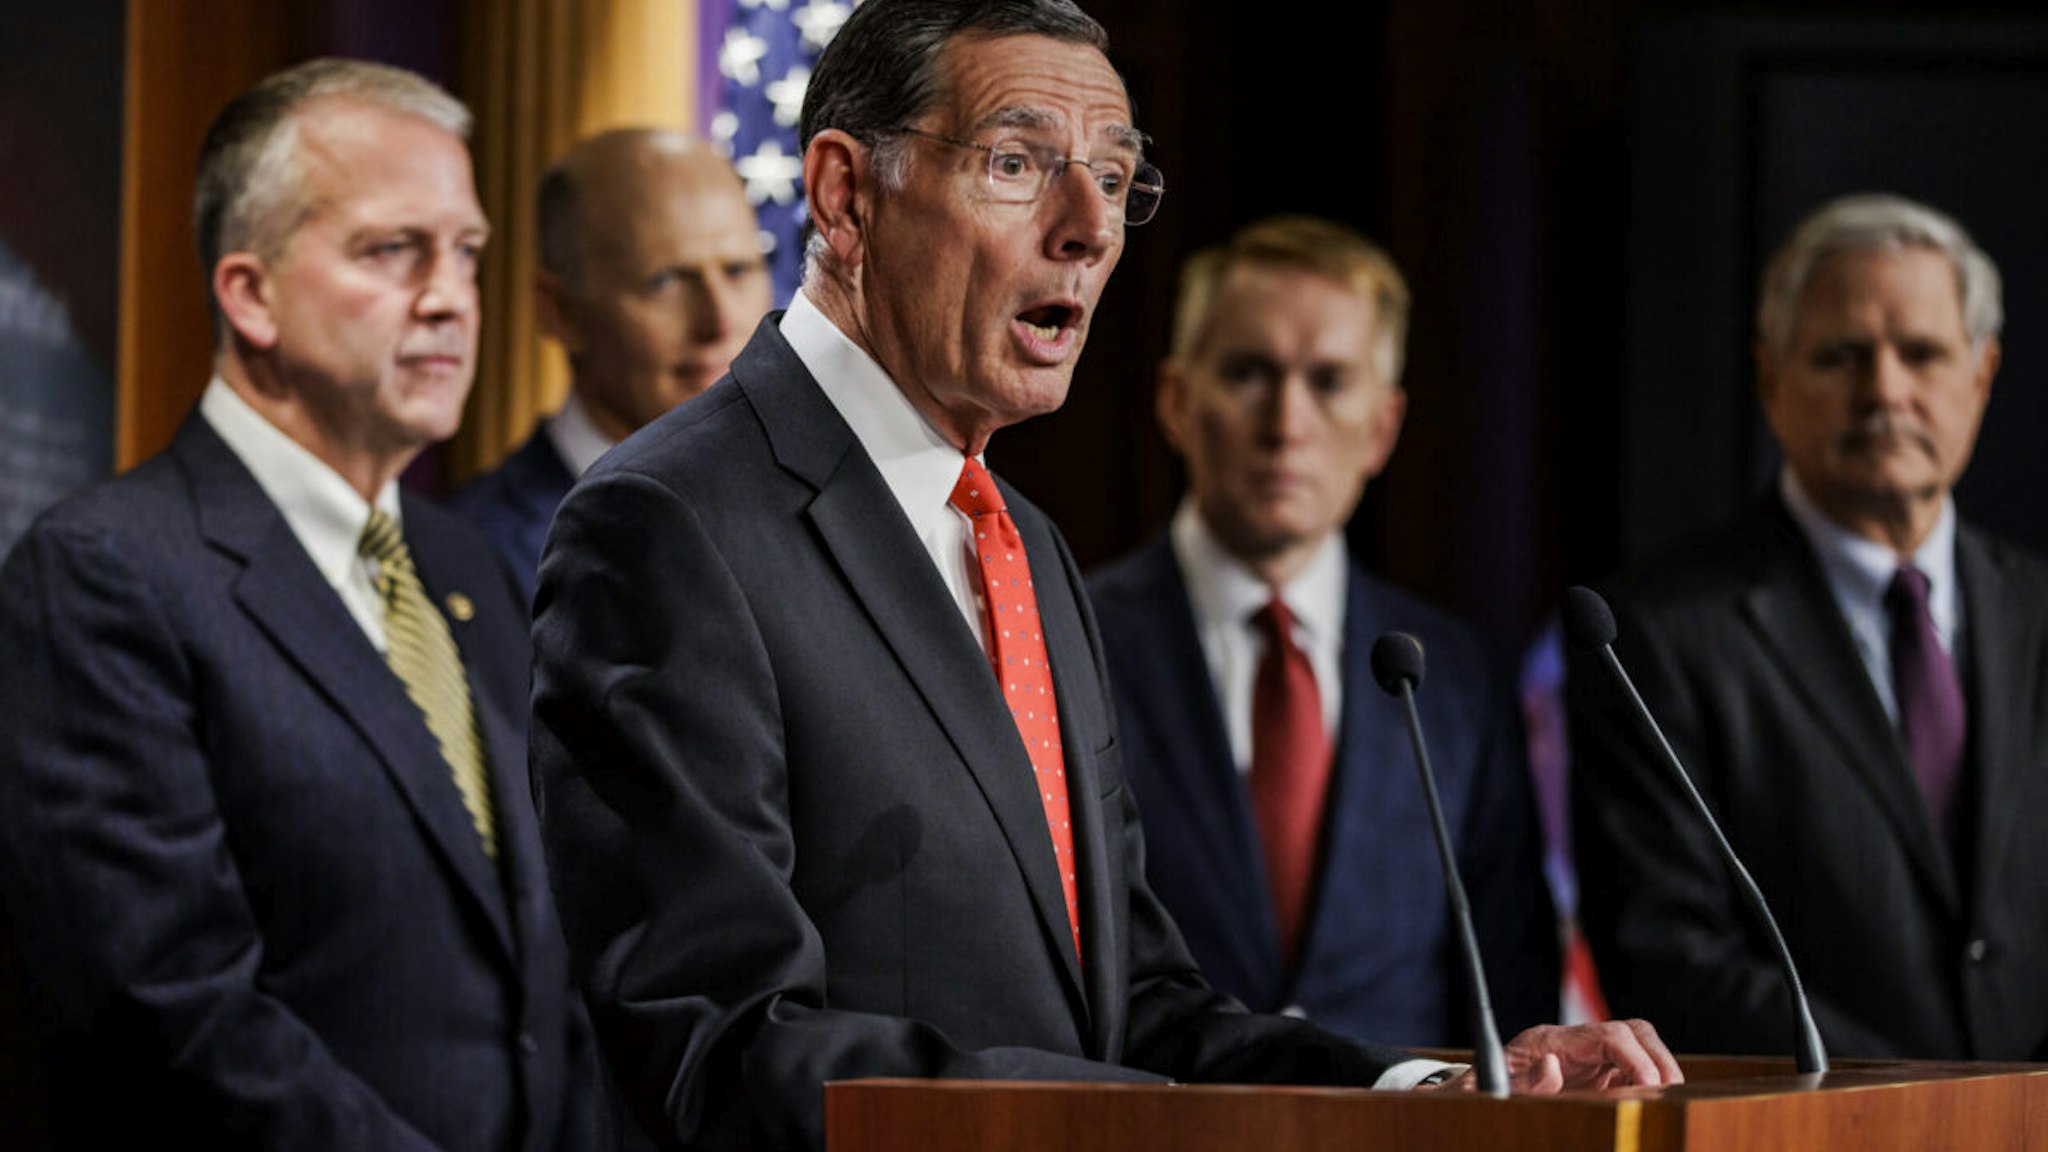 Sen. John Barrasso (R-WY) speaks alongside other Republican Senators during a press conference on rising gas an energy prices at the U.S. Capitol on October 27, 2021 in Washington, DC